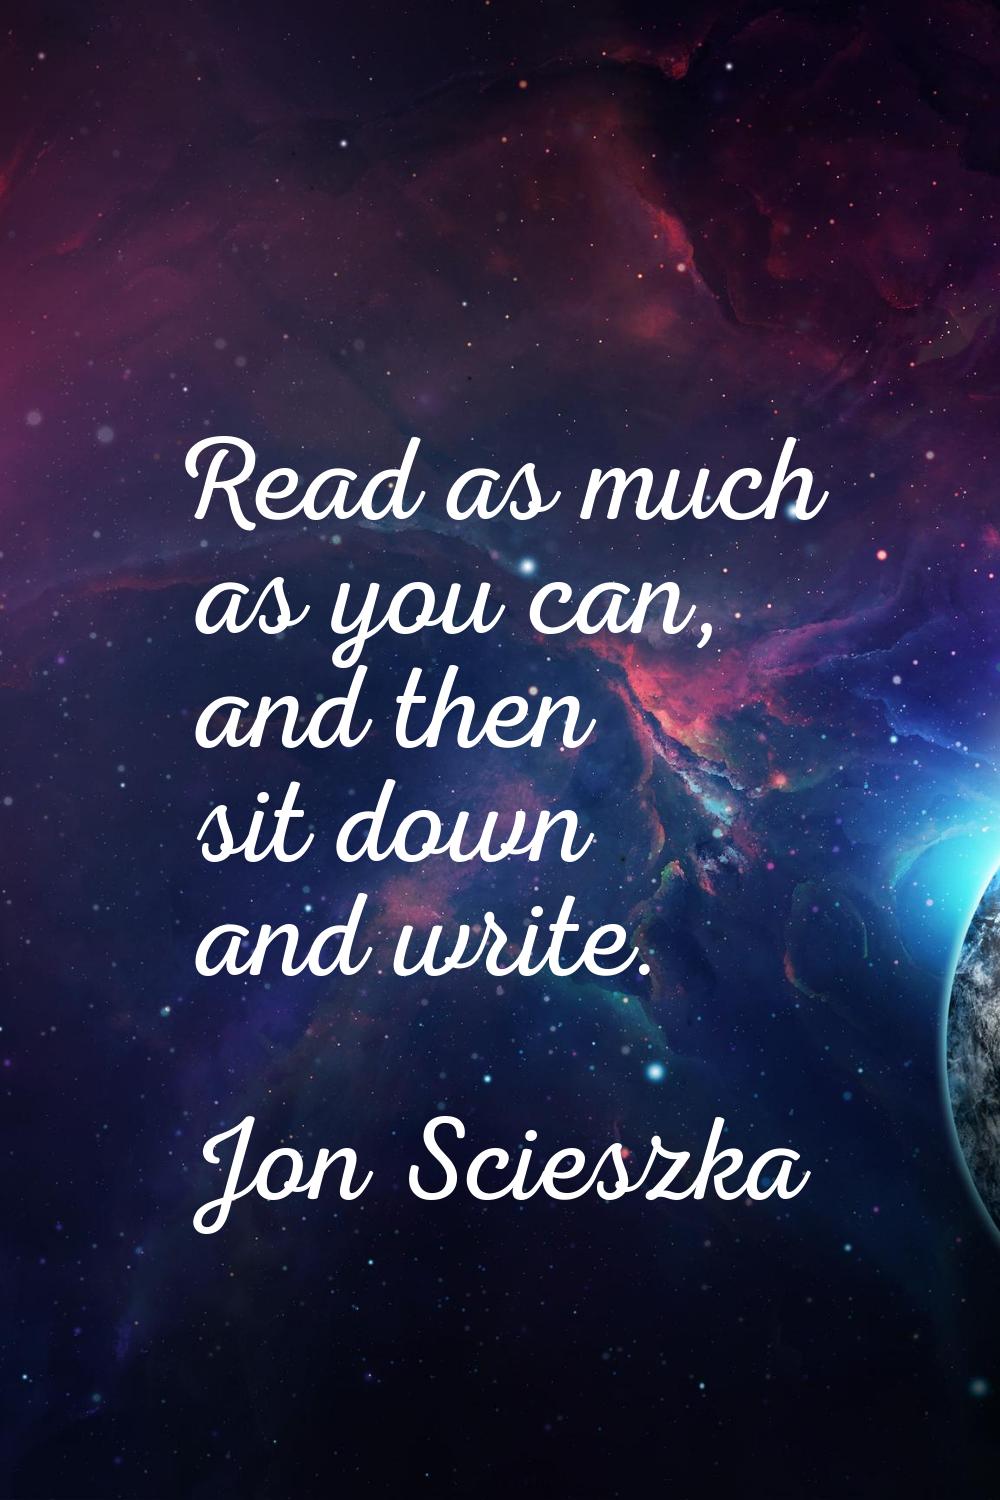 Read as much as you can, and then sit down and write.